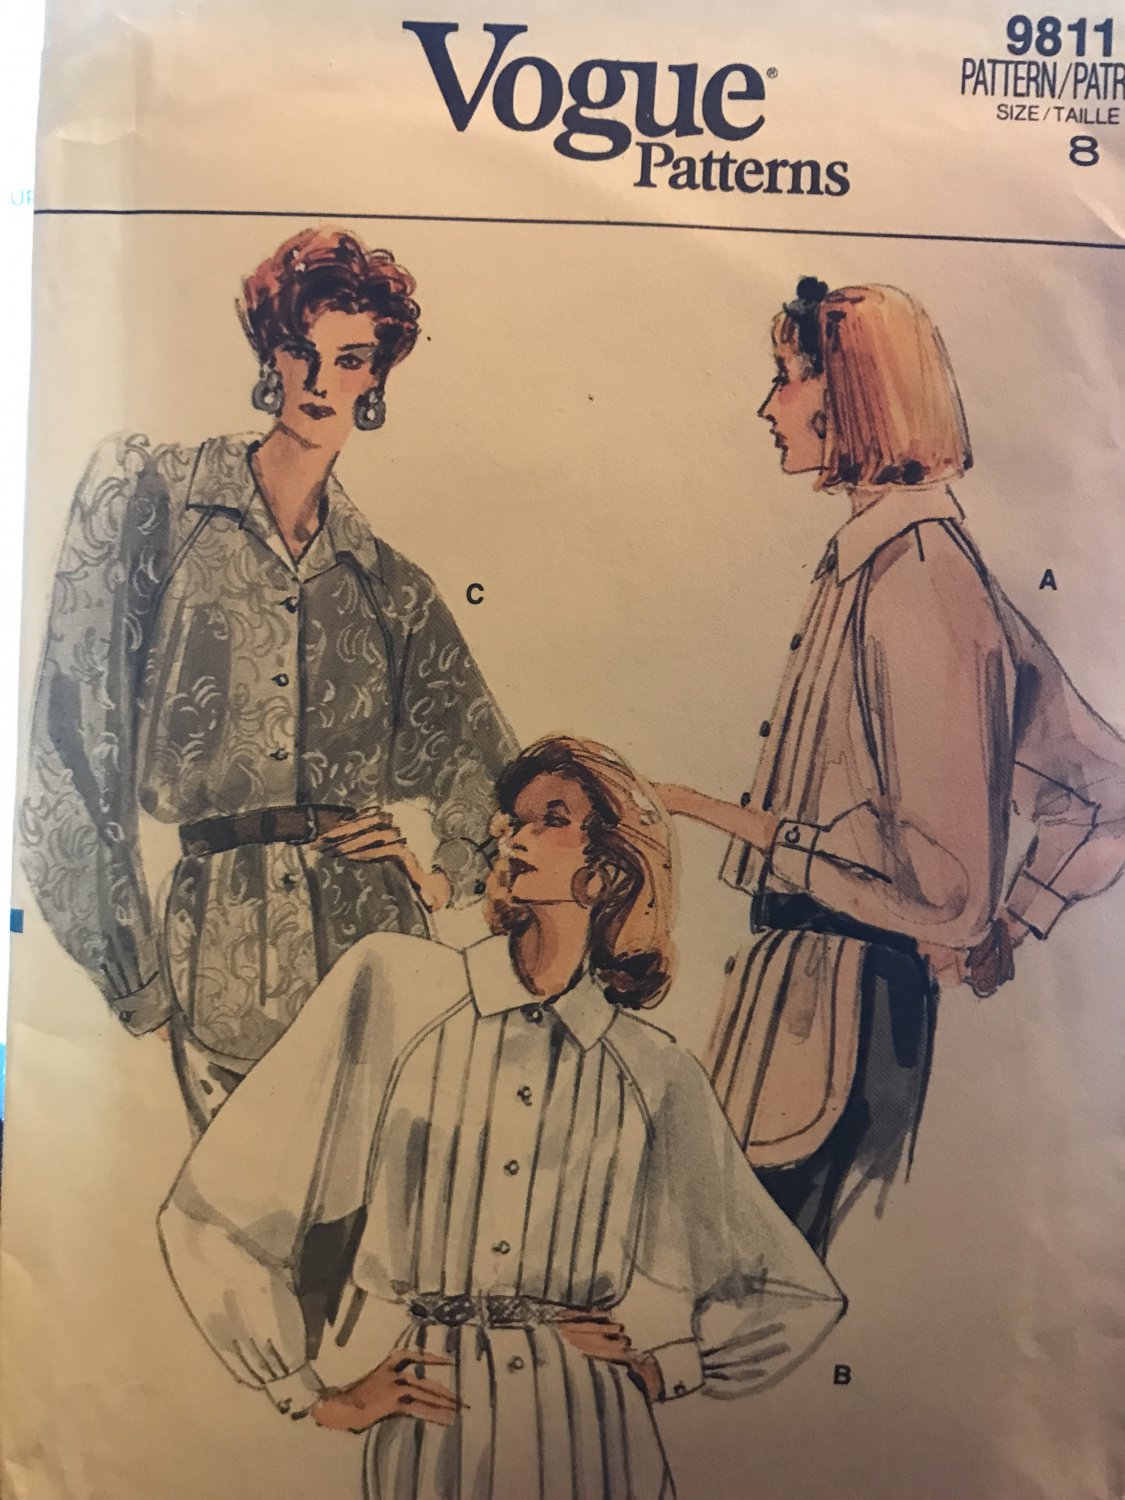 Vogue 9811 Loose-fitting blouse tunic sewing pattern size 8